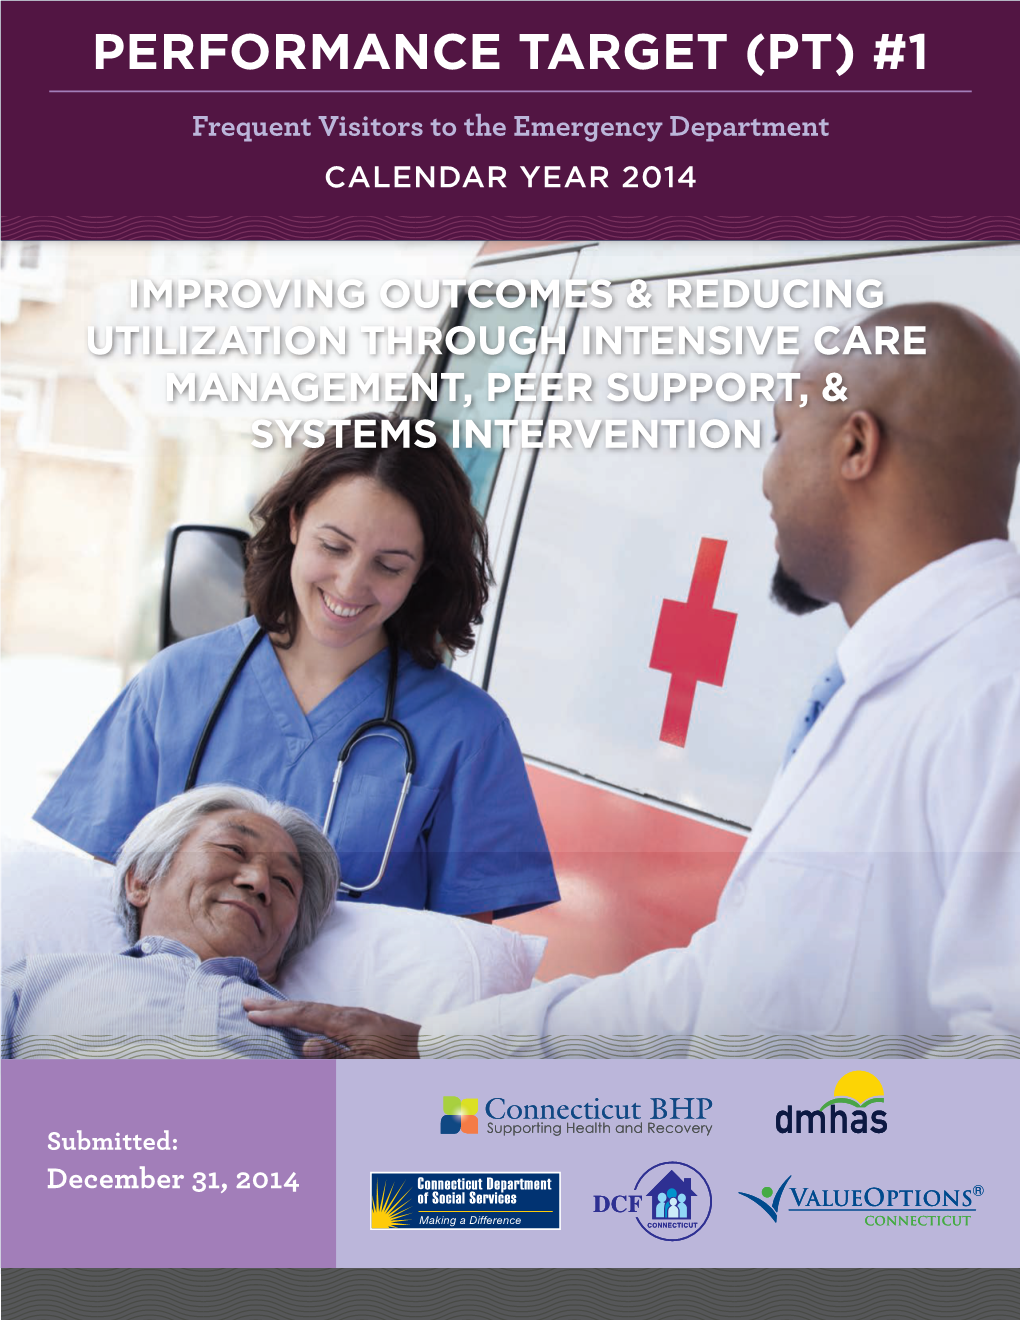 Frequent Visitors to the Emergency Department CALENDAR YEAR 2014